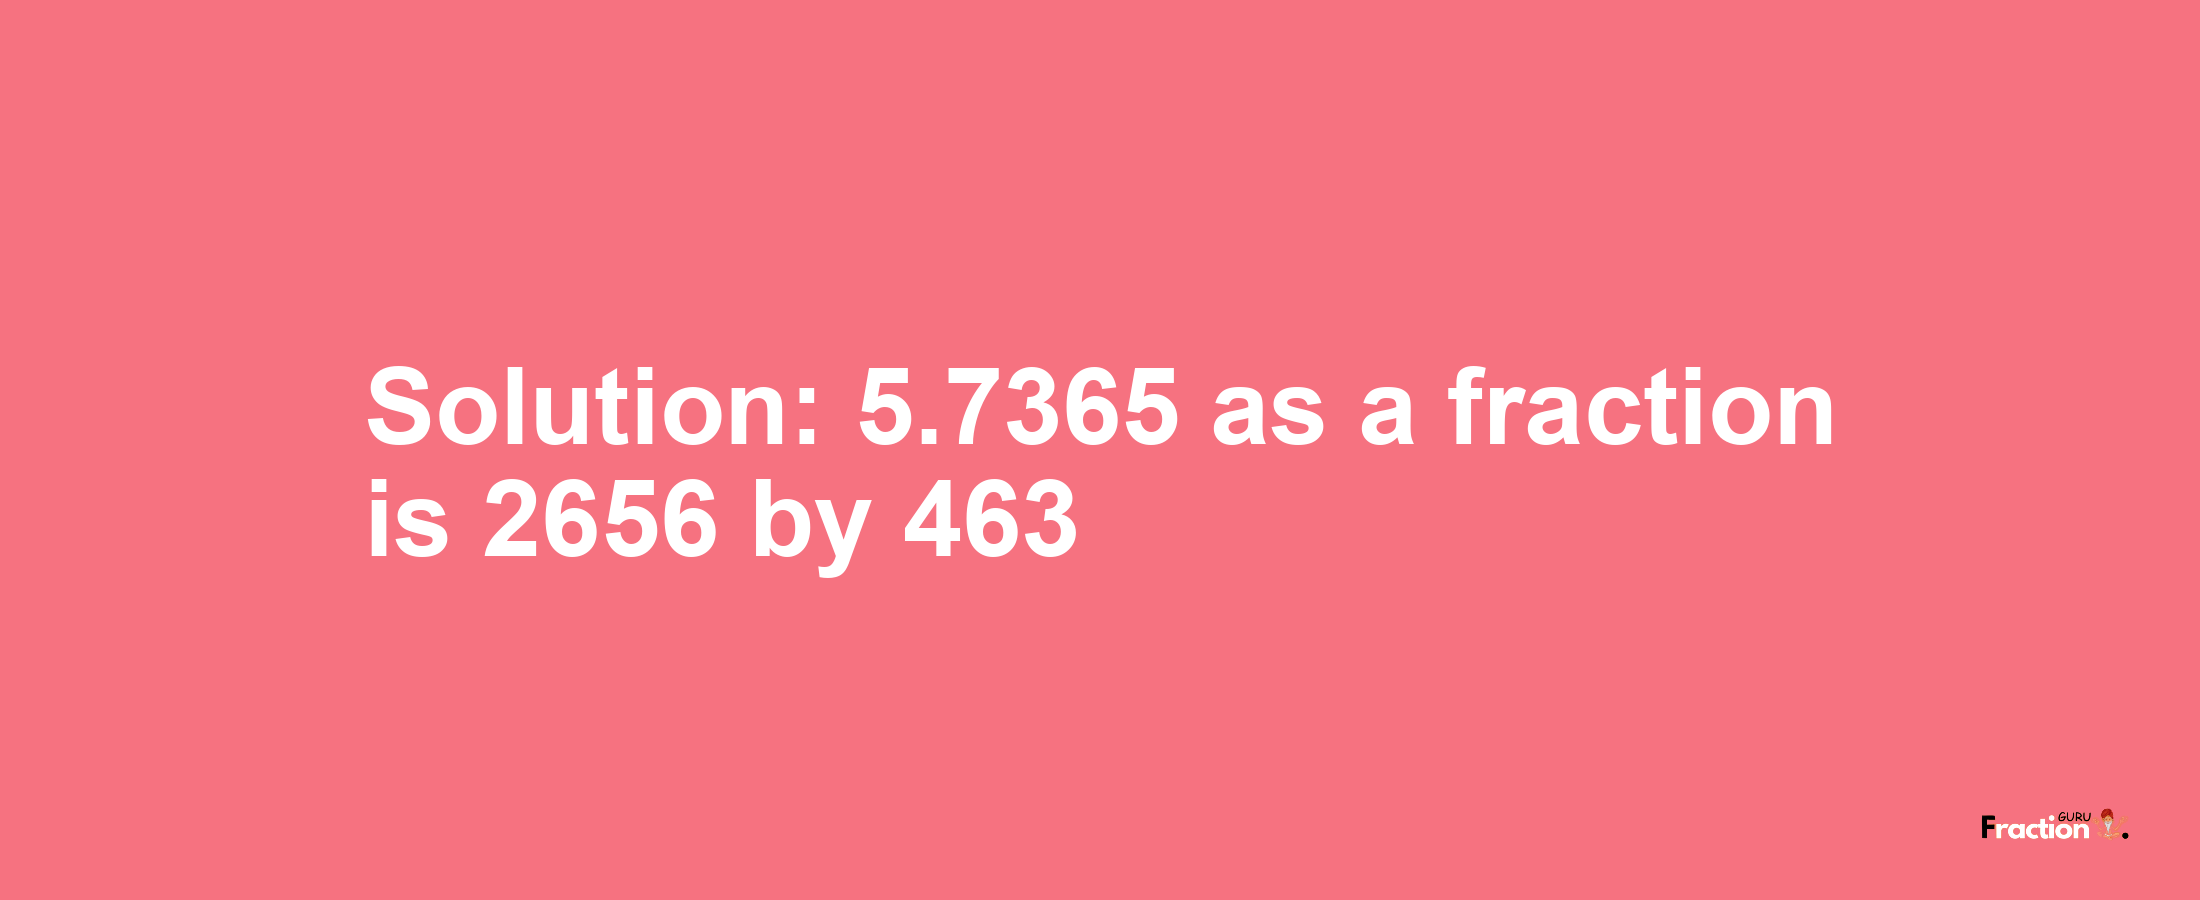 Solution:5.7365 as a fraction is 2656/463